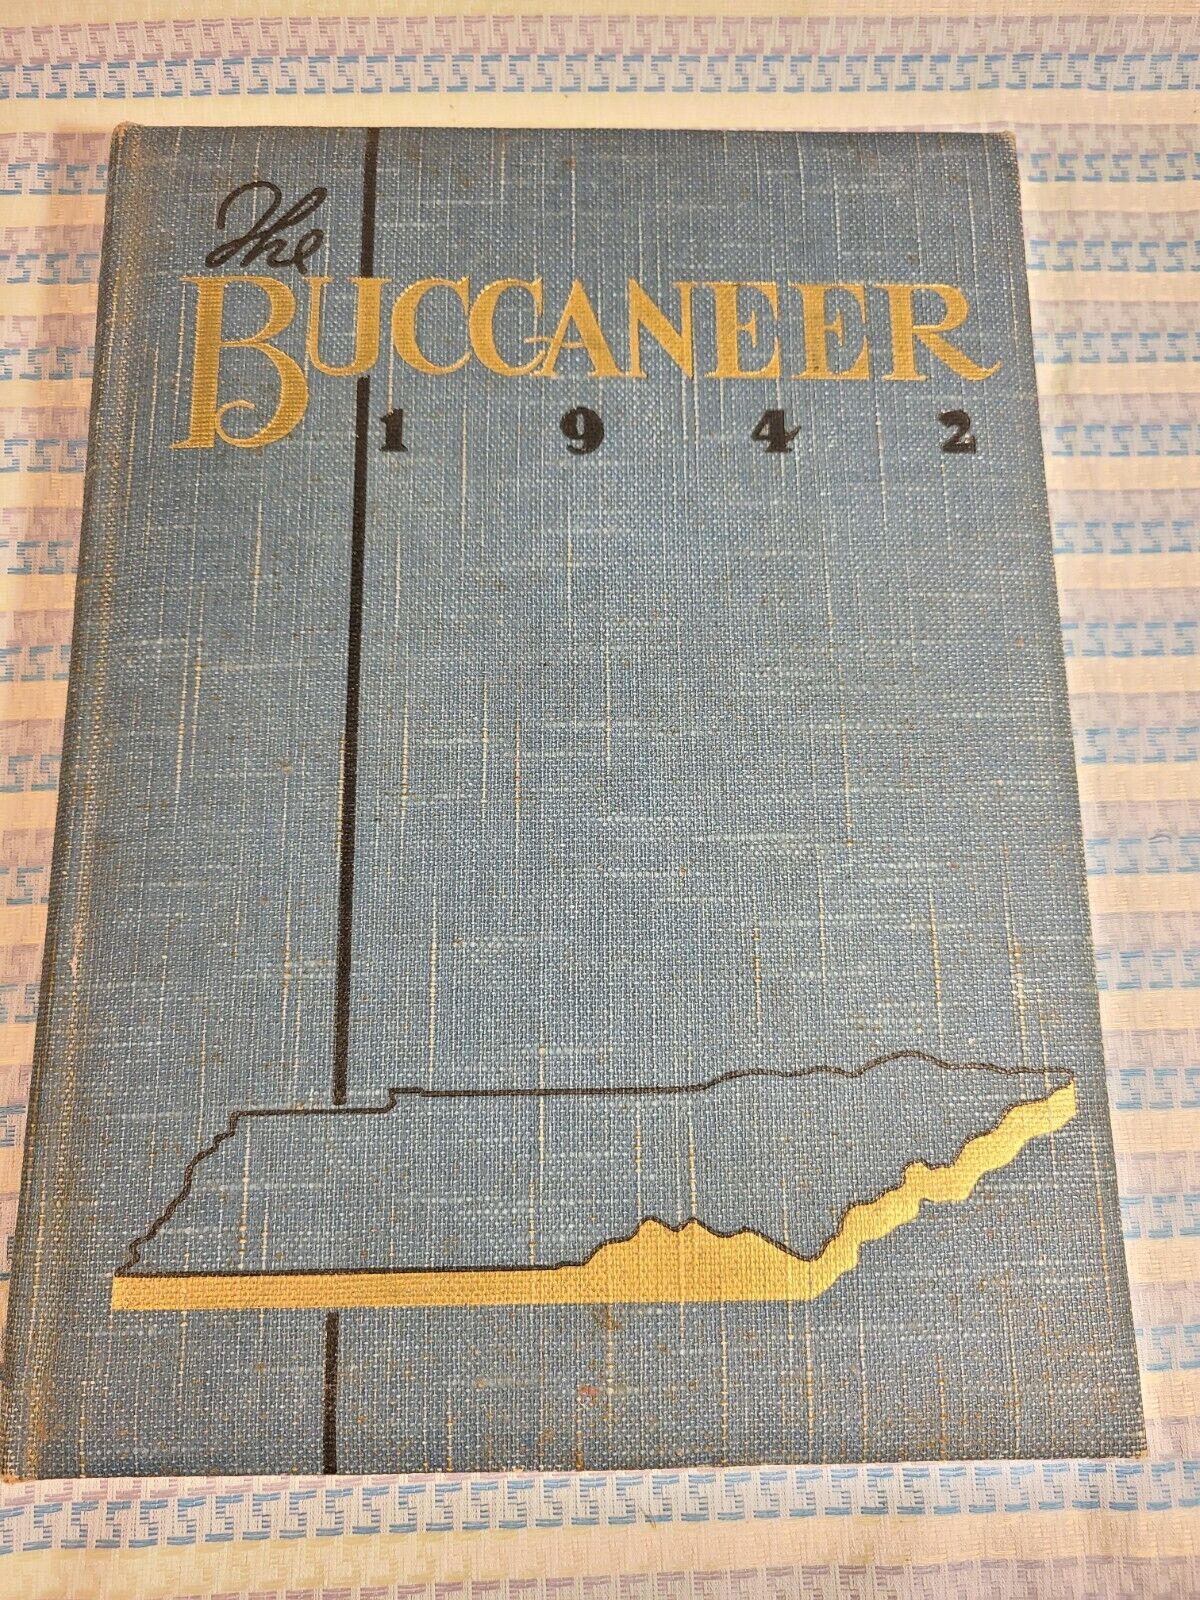 1942 The Buccaneer Yearbook East Tennessee State Teachers College Johnson City